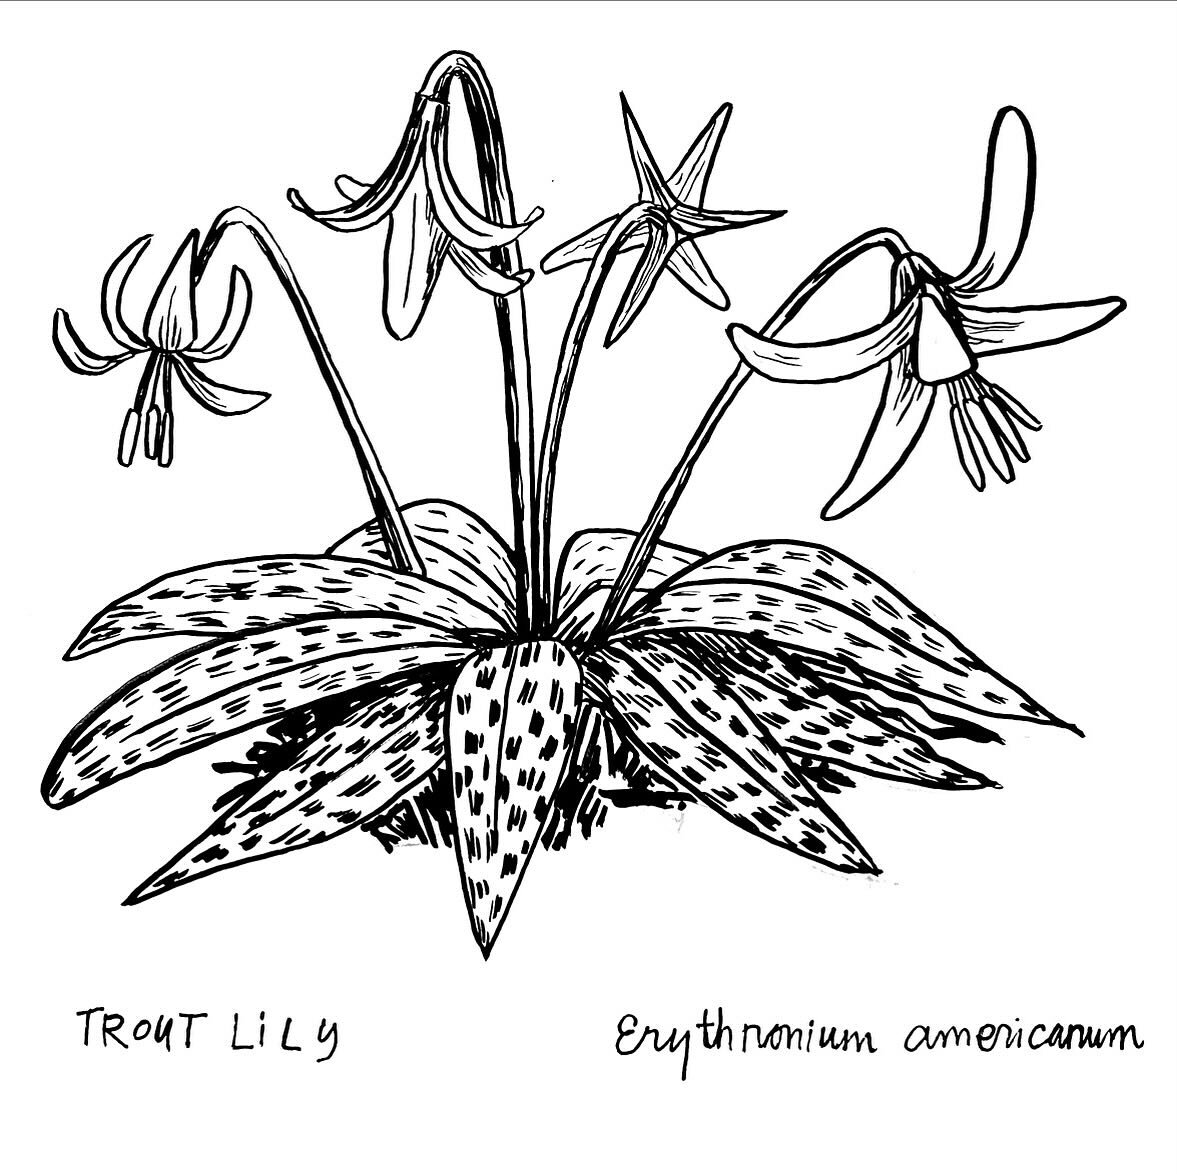 Day 2 of the April Plant Drawing Challenge! Trout lily, a spring ephemeral of the Northeastern woods. Their leaves are shaped and patterned kind of like trout! 

I might just commit to an all-spring-ephemeral first week because these are all so cool,